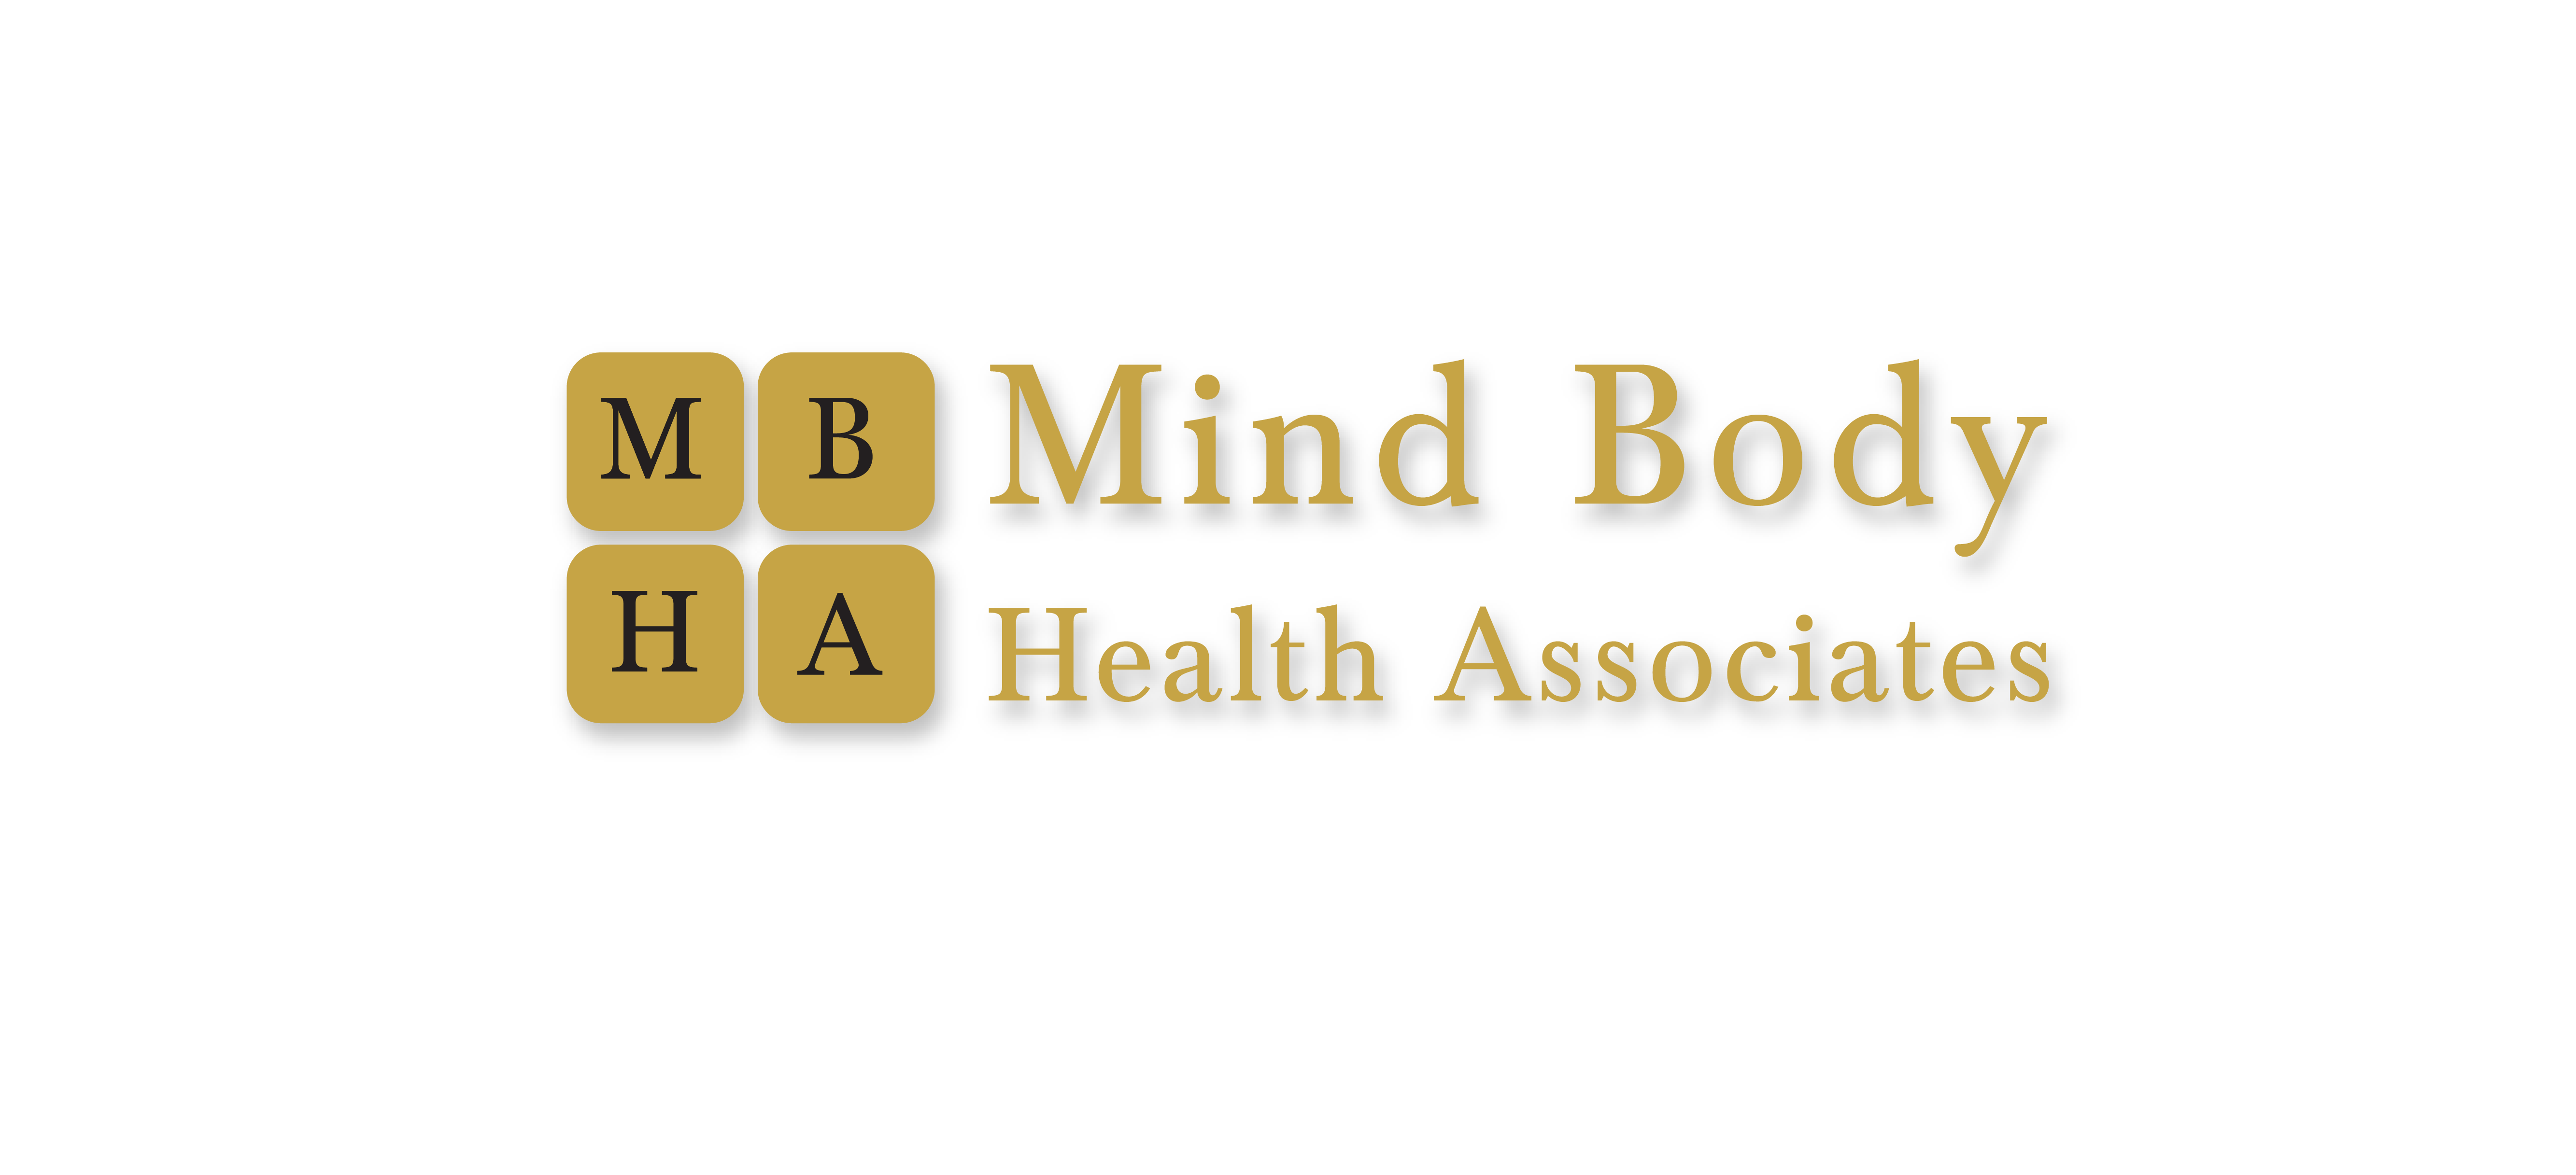 Mind Body Health Associates Header Night Blue Sky  with Silhouettes of people